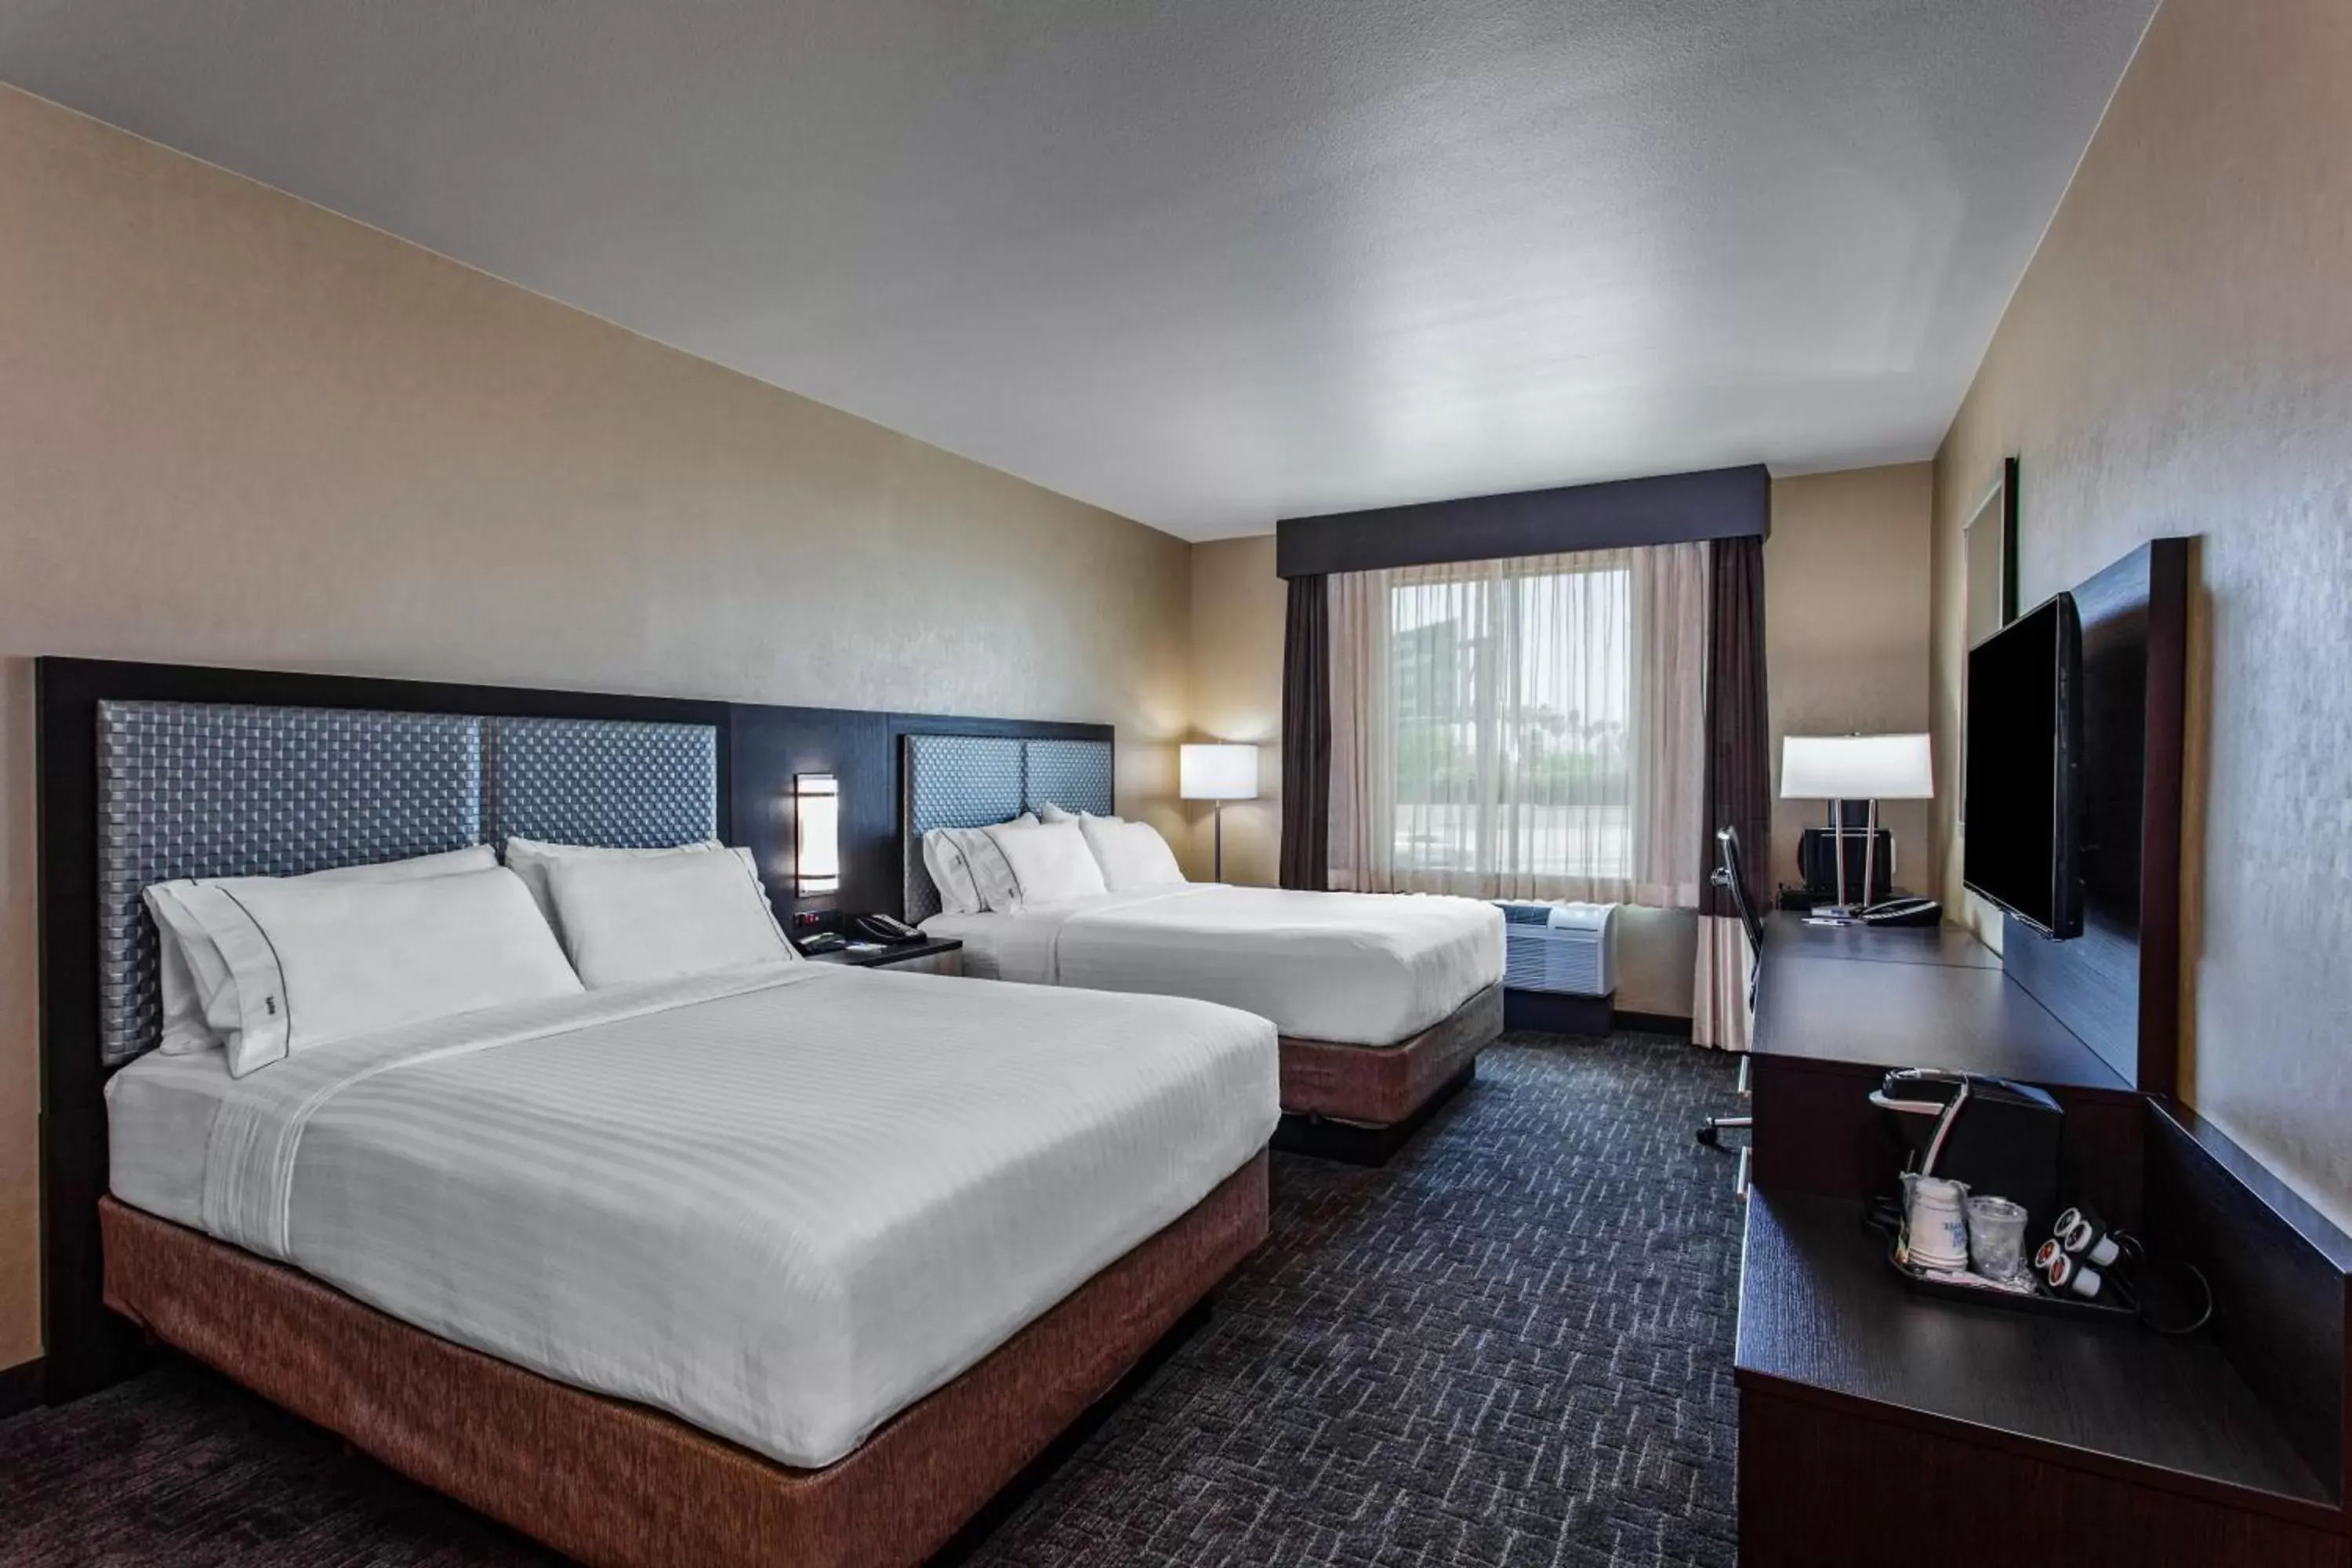 Day, Room Photo in Holiday Inn Express & Suites Anaheim Resort Area, an IHG Hotel